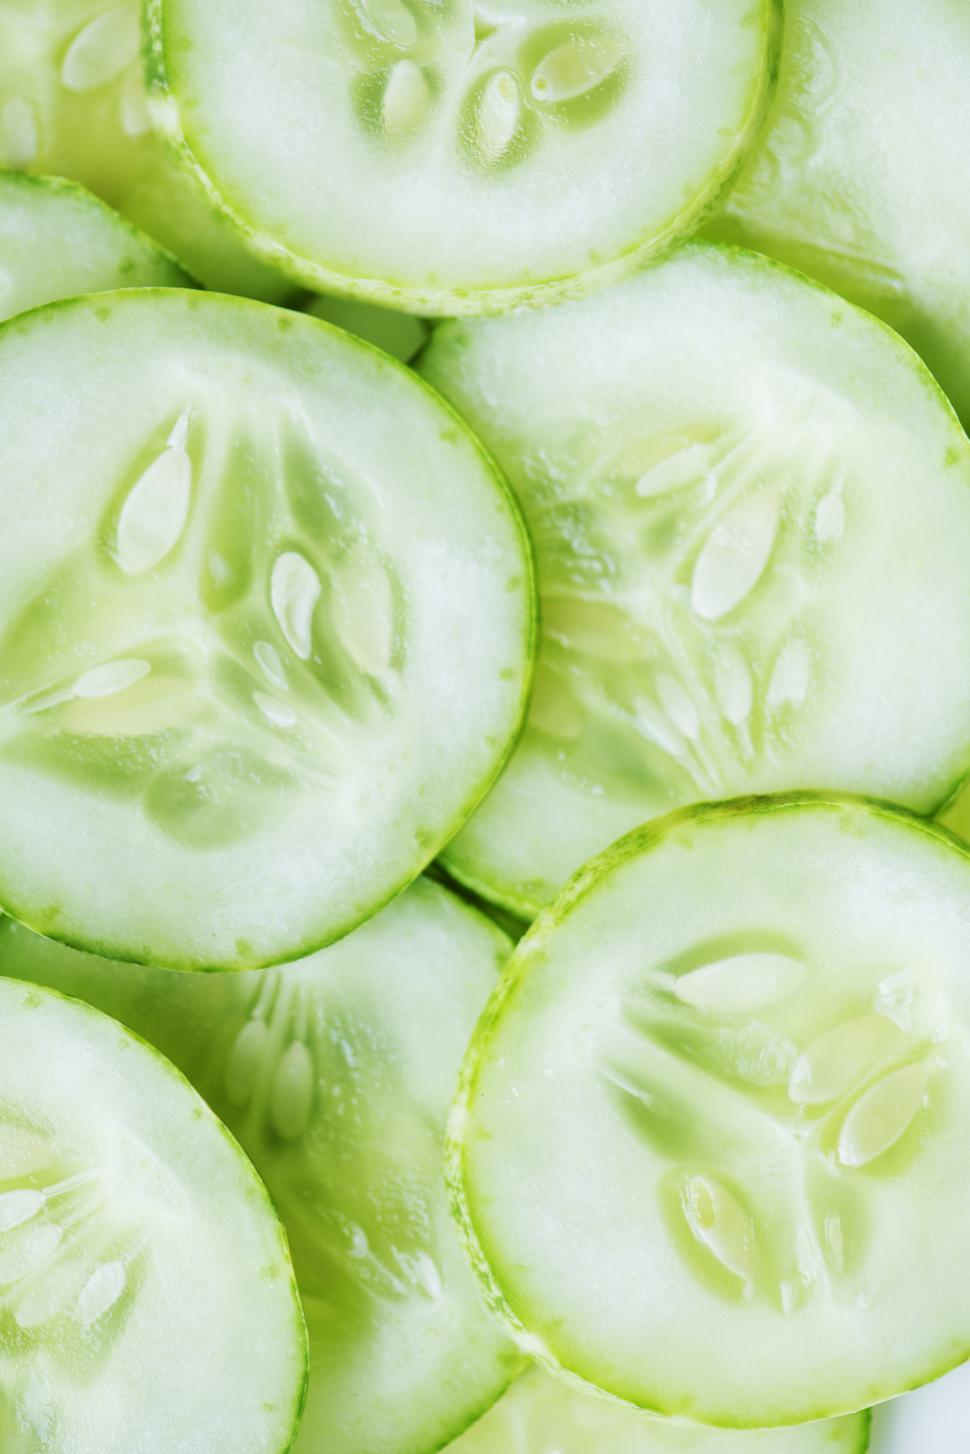 Free Image of Vertical close up of cucumber slices 